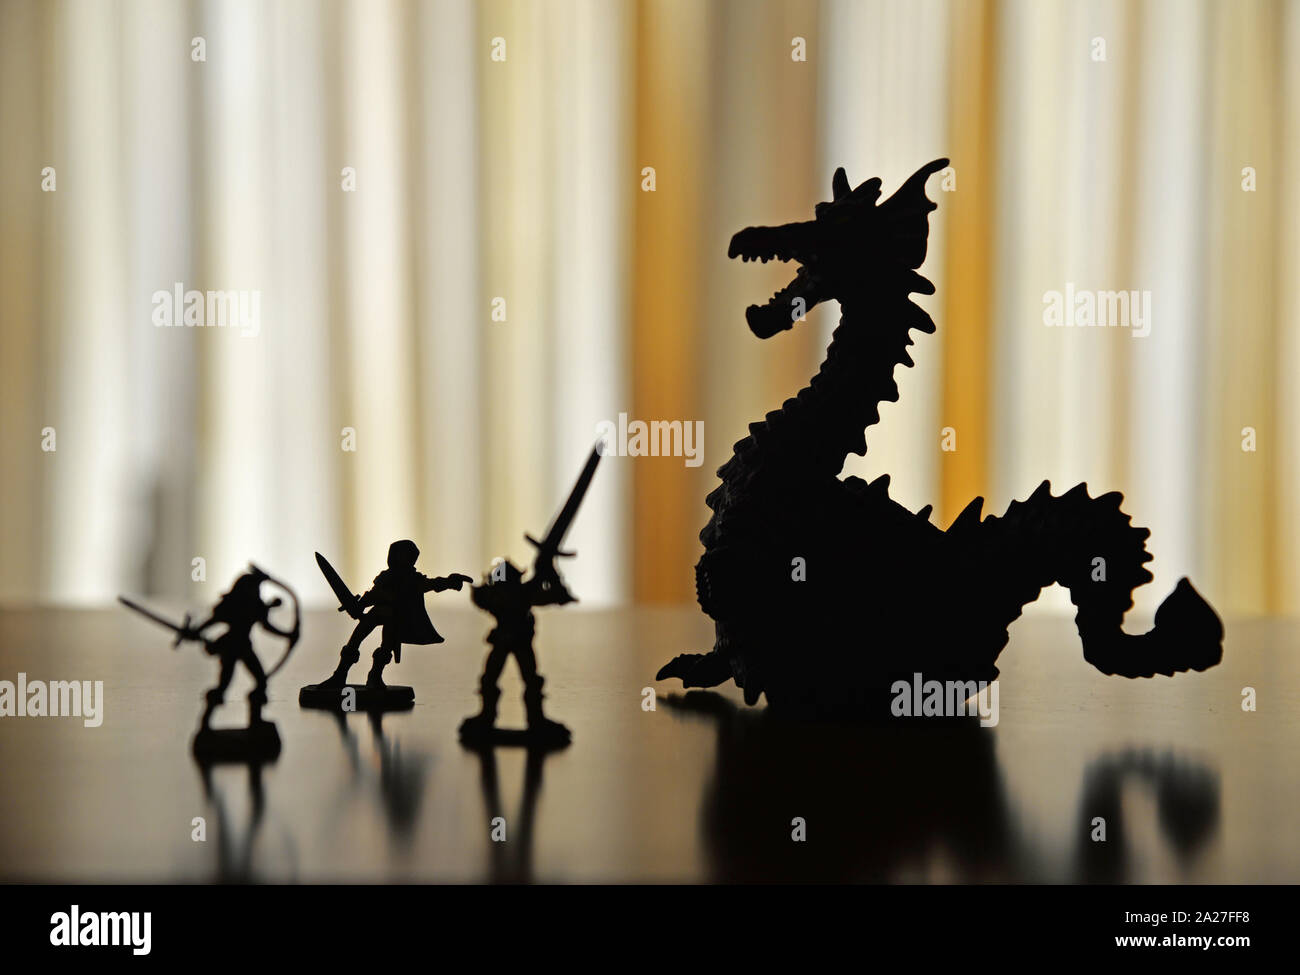 Silhouettes of a dragon and adventuring party figures on a bookcase shelf against a vivid yellow background. Stock Photo